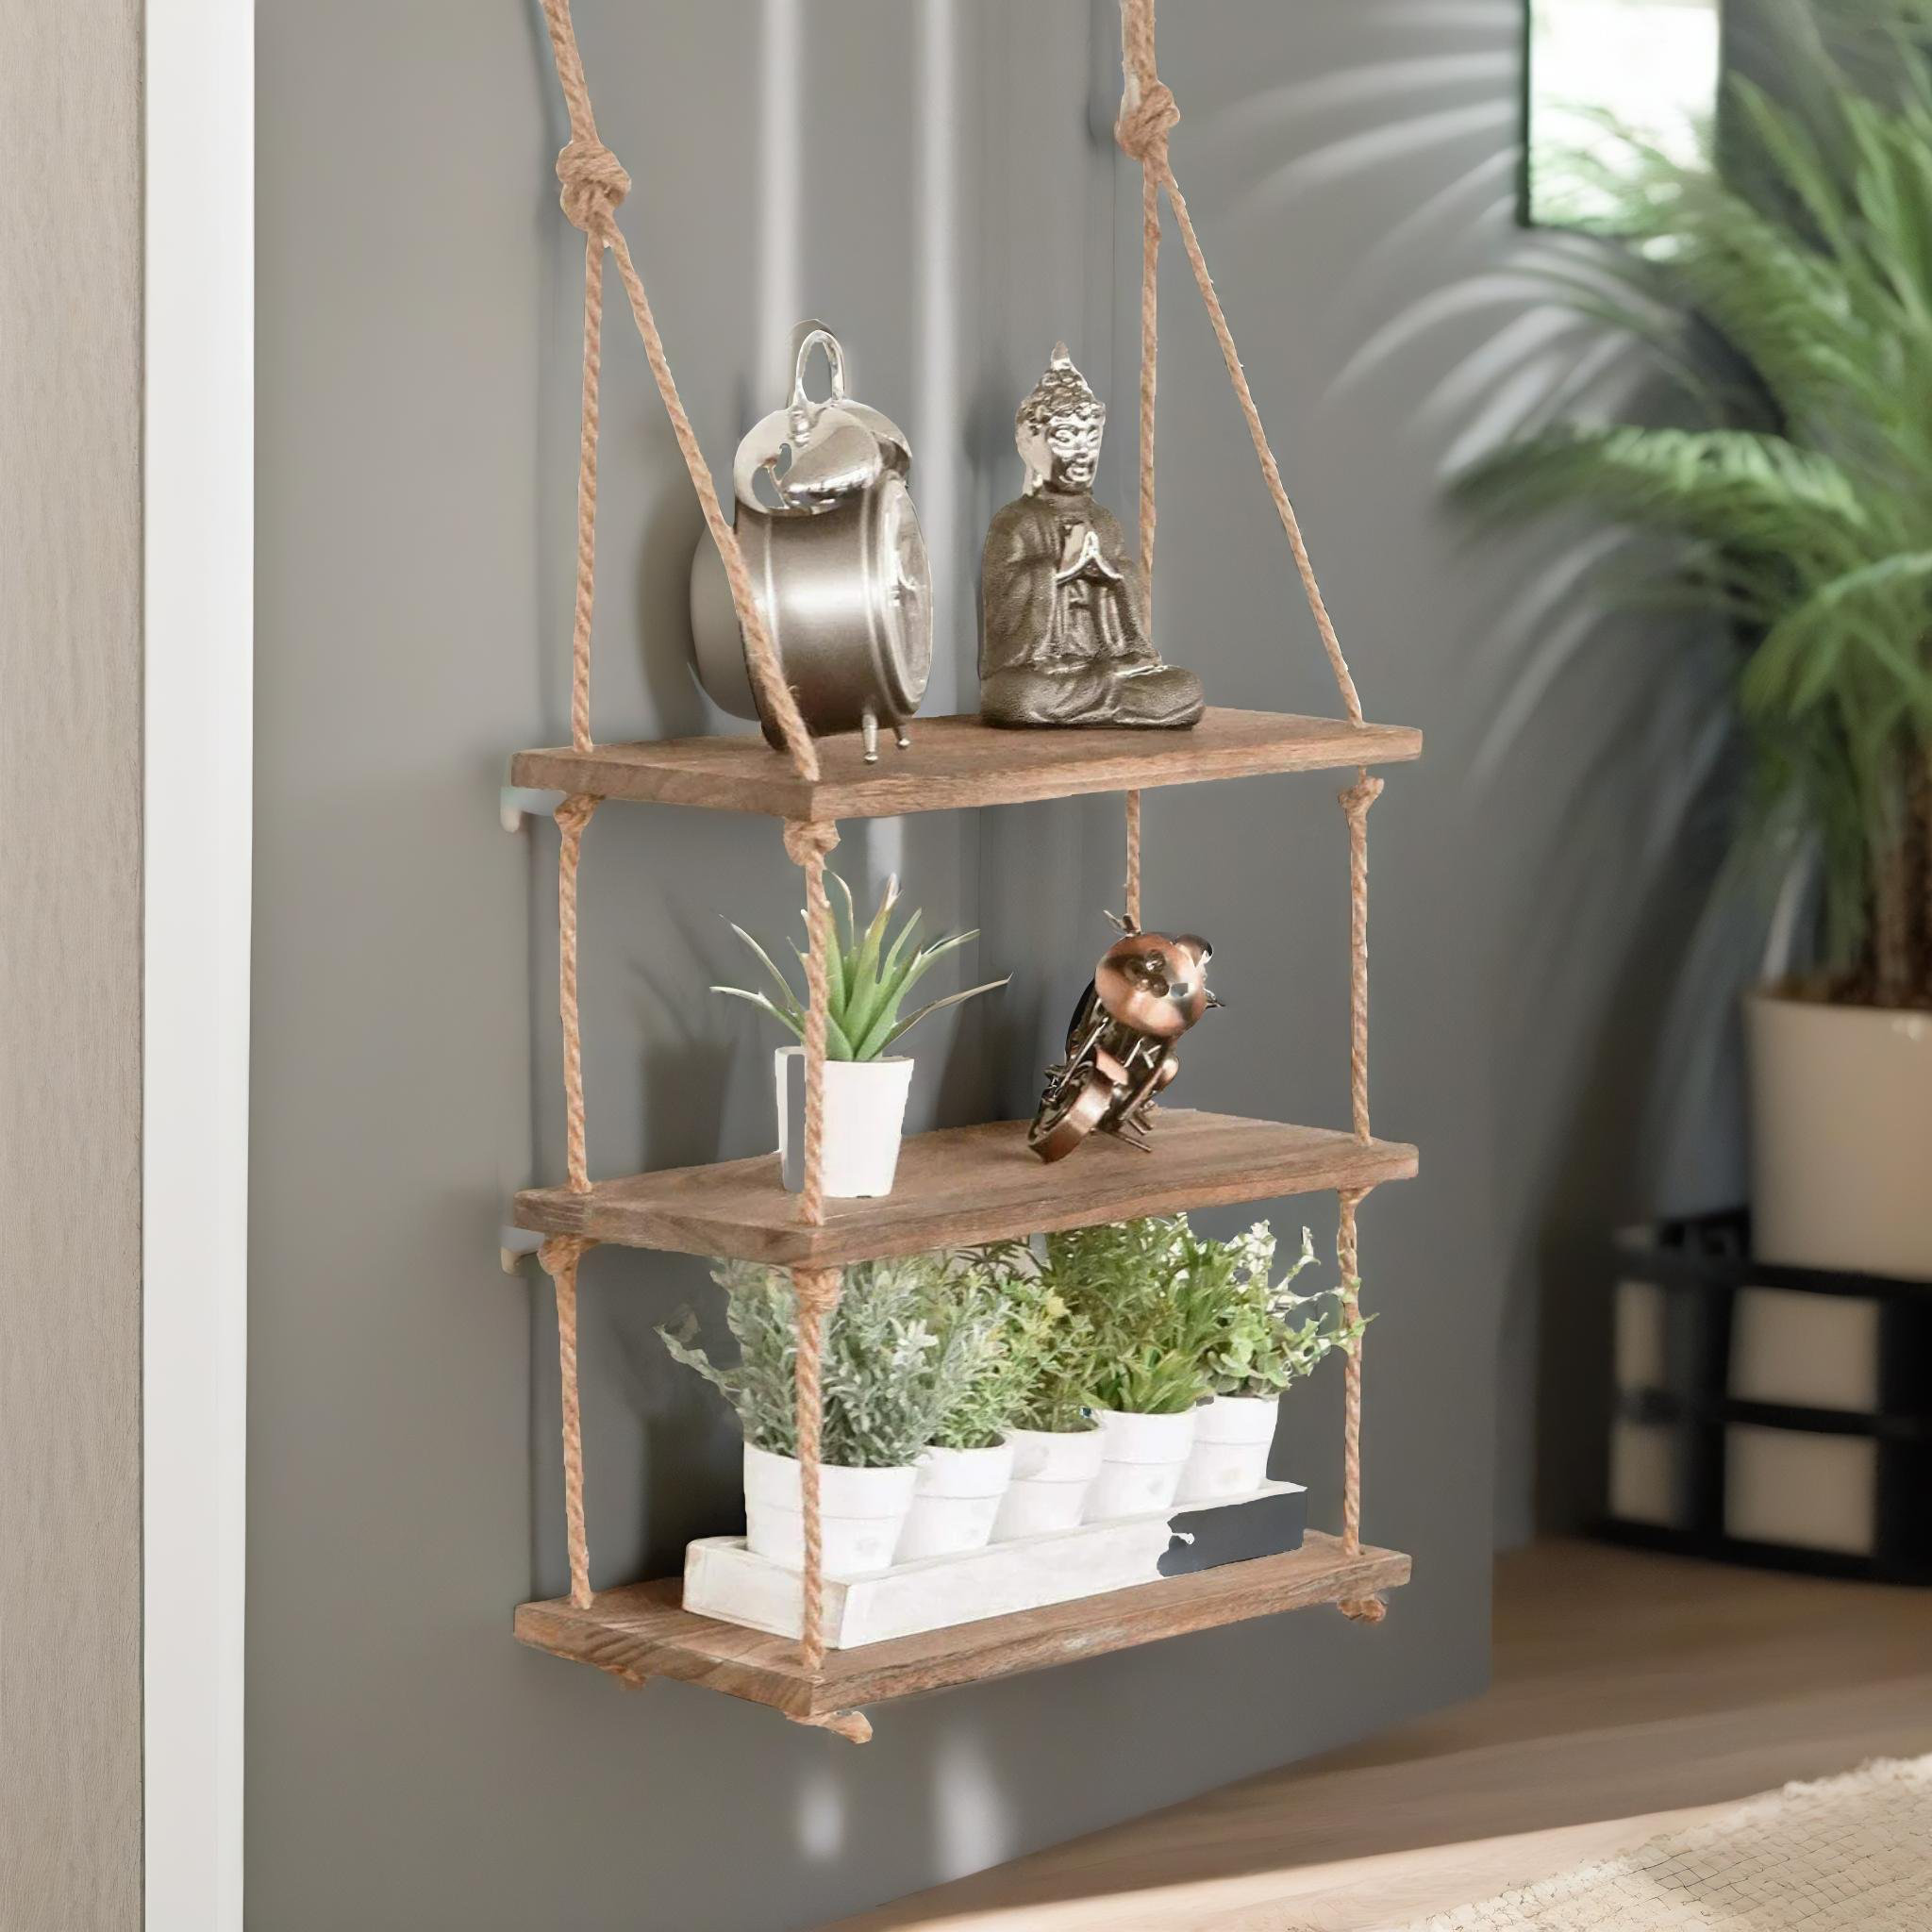 Mason Furniture 3 Tier Wooden Floating Rope Shelf Wall Mounted